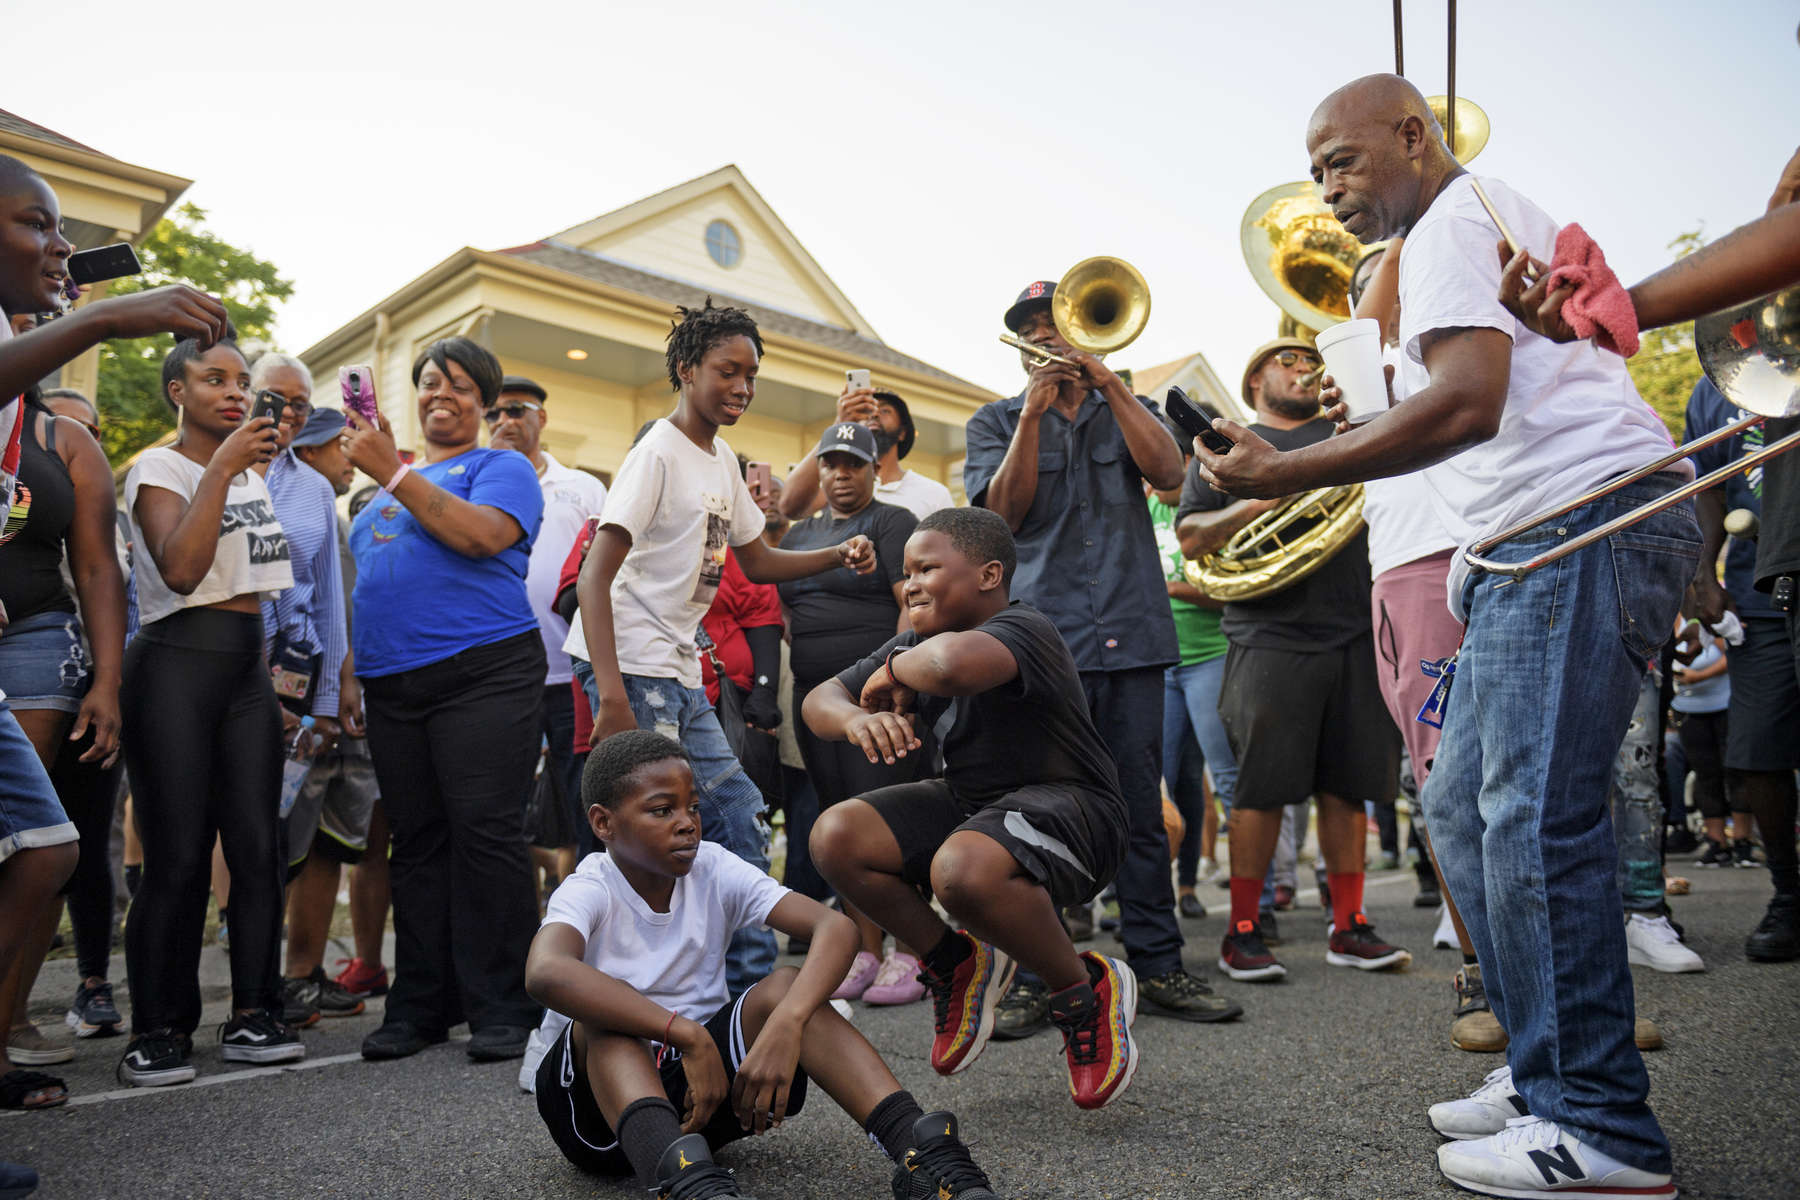 The Big 6 Brass Band leads a second line past Dooky Chase restaurant to celebrate the life and legacy of the legendary New Orleans chef Leah Chase in New Orleans, La. Monday, June 3, 2019.